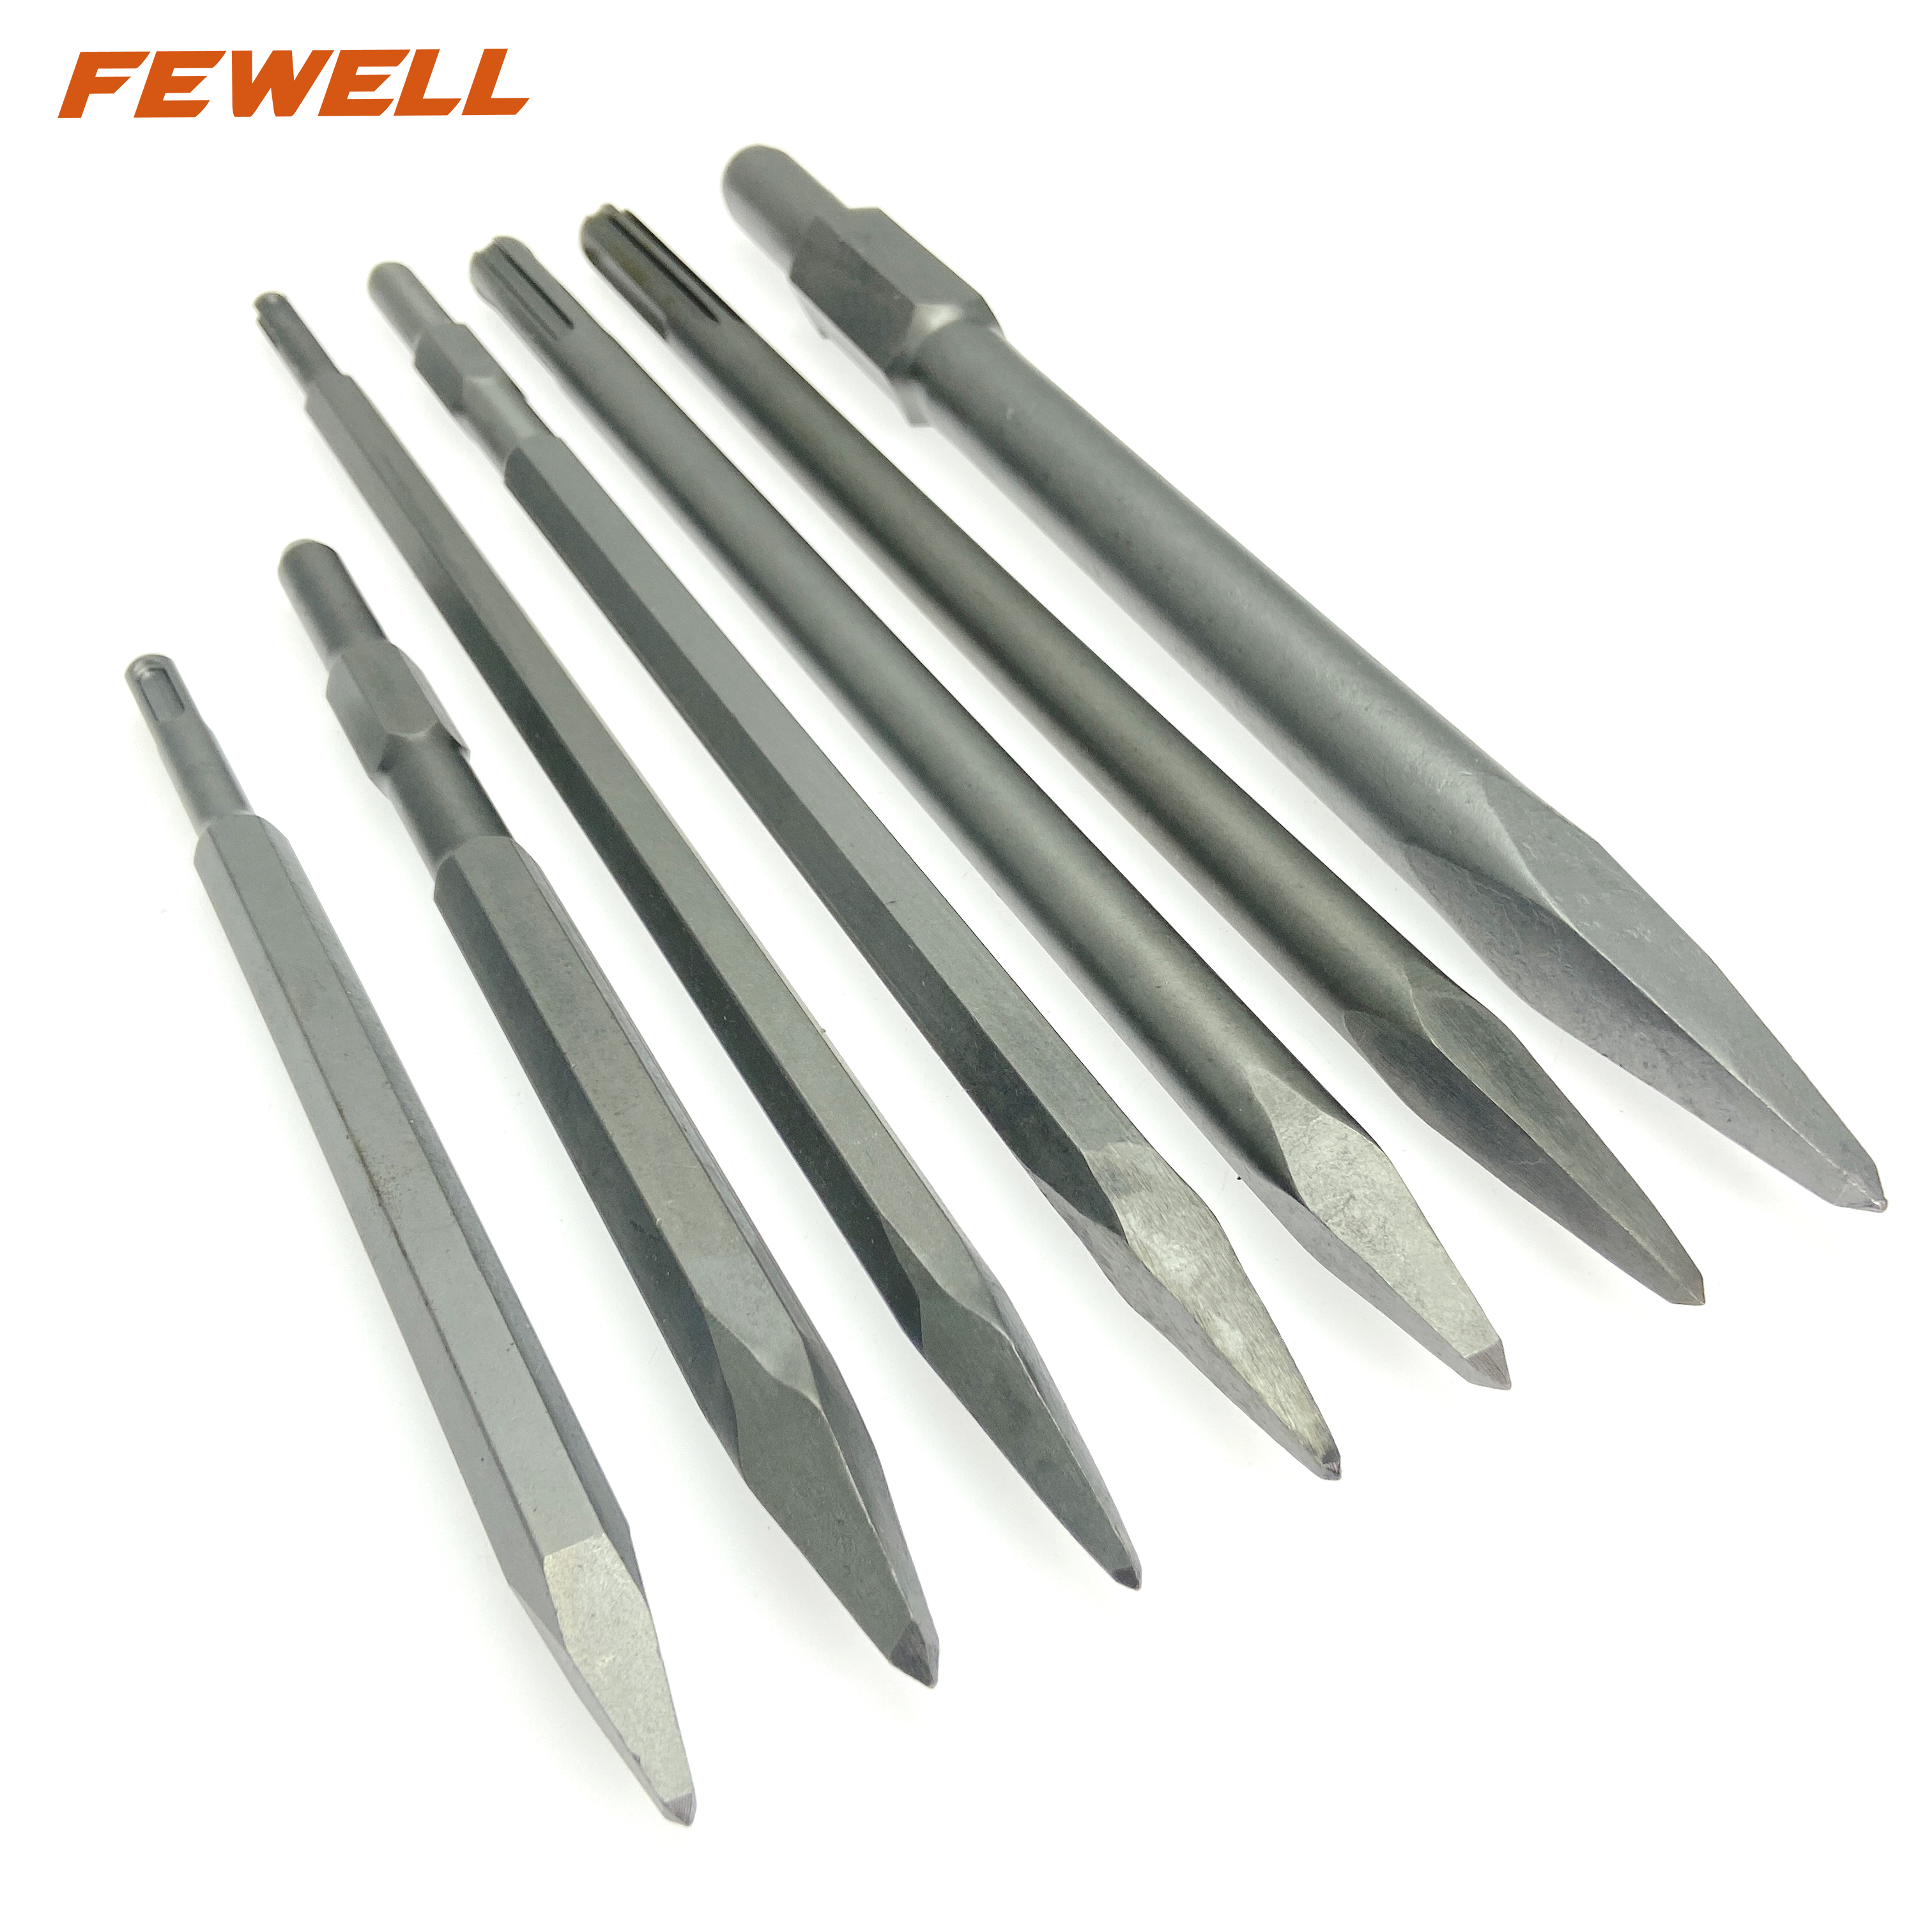 High quality 17mm Hex shank Electric hammer drill bit point chisel for Tile Masonry Concrete Brick stone